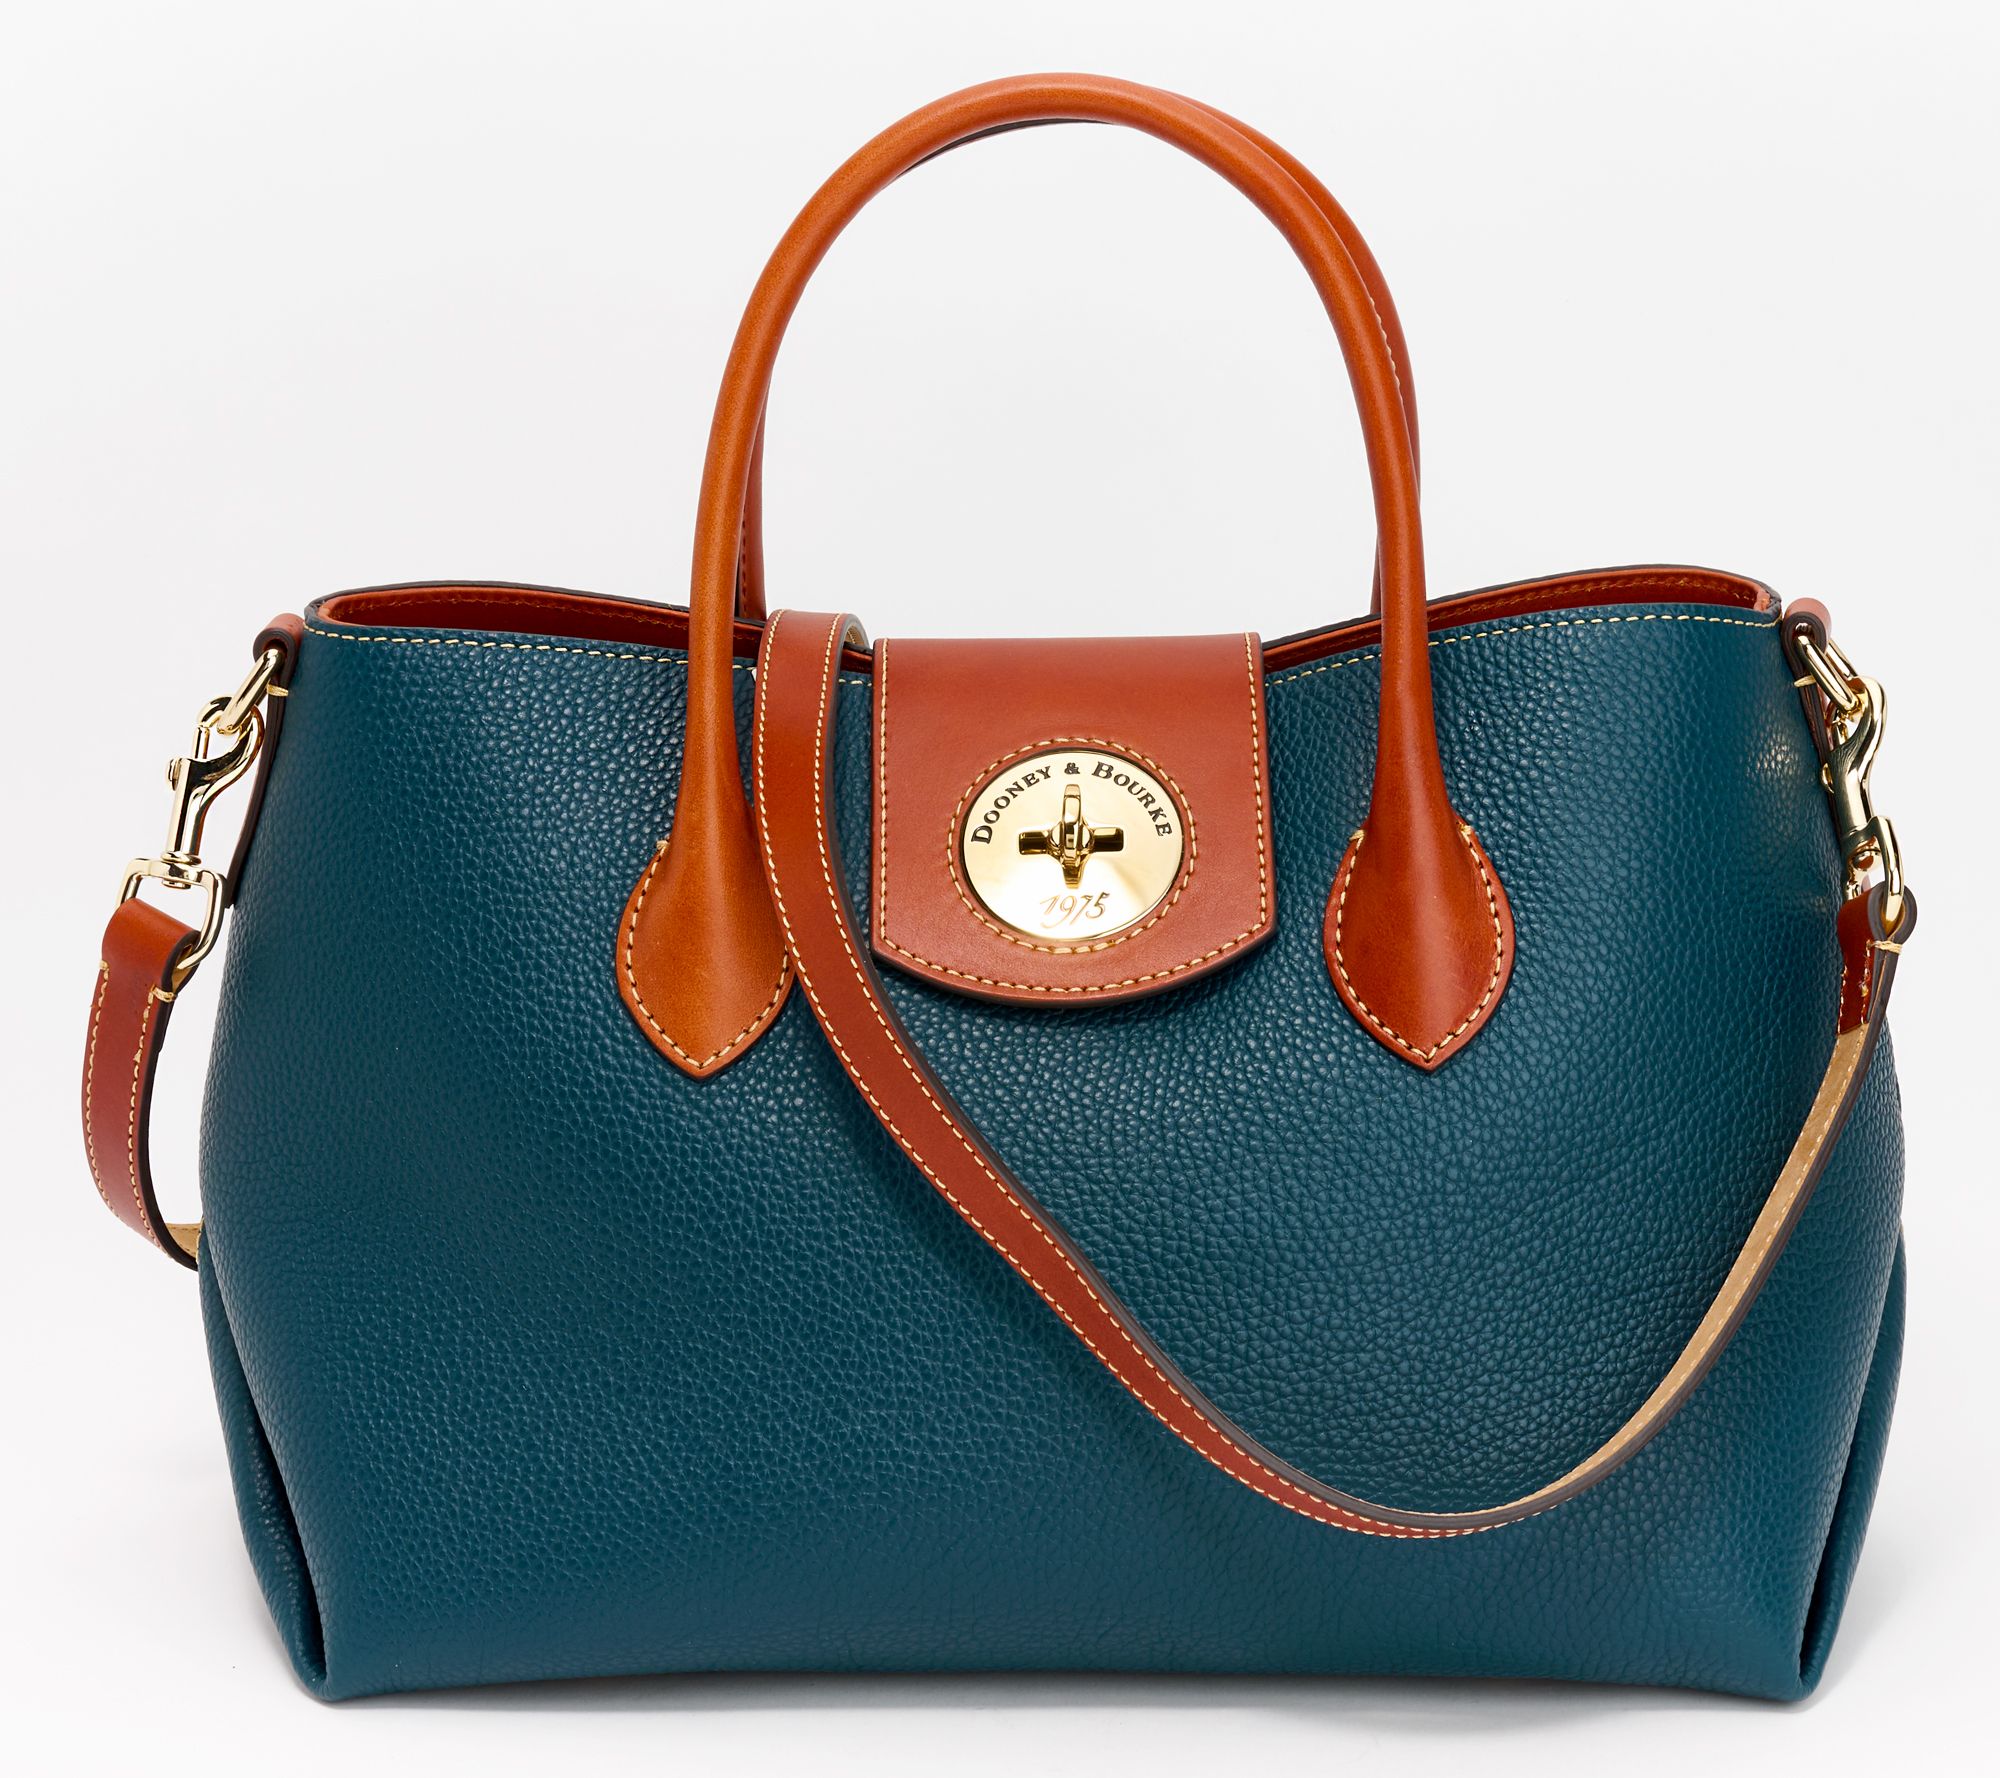 Dooney & Bourke Turnlock Leather Handle Tote - QVC.com